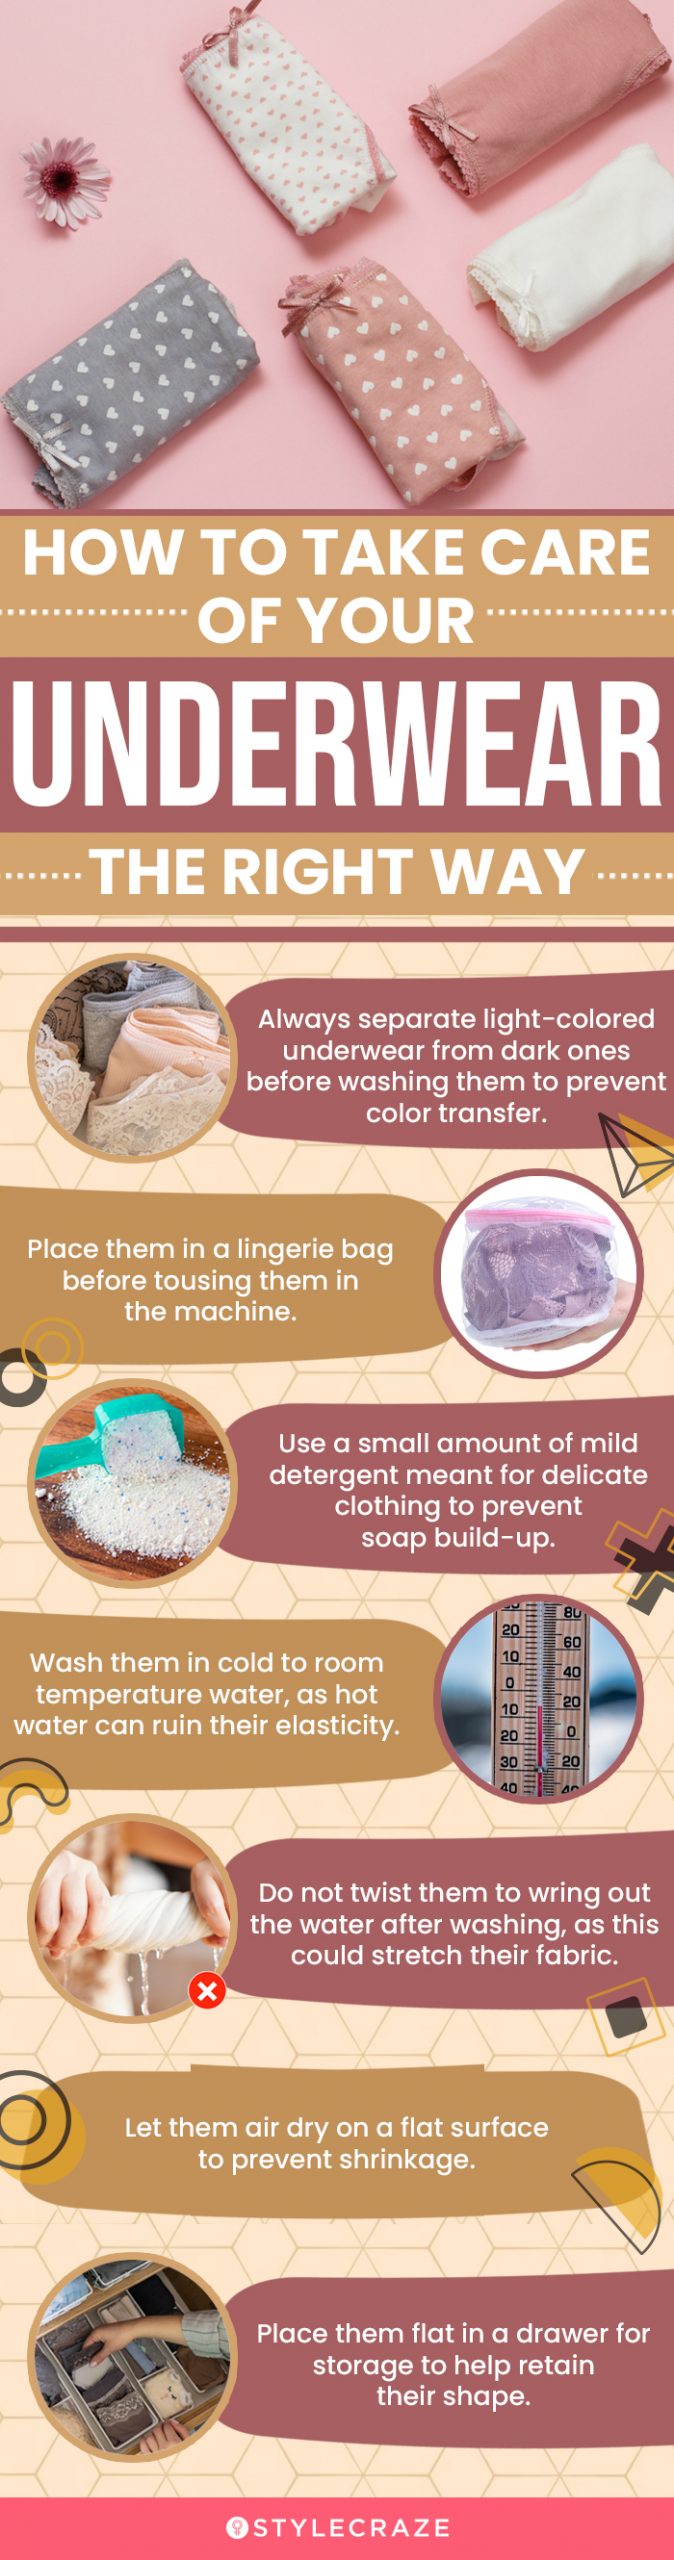 How To Take Care Of Your Underwear The Right Way (infographic)